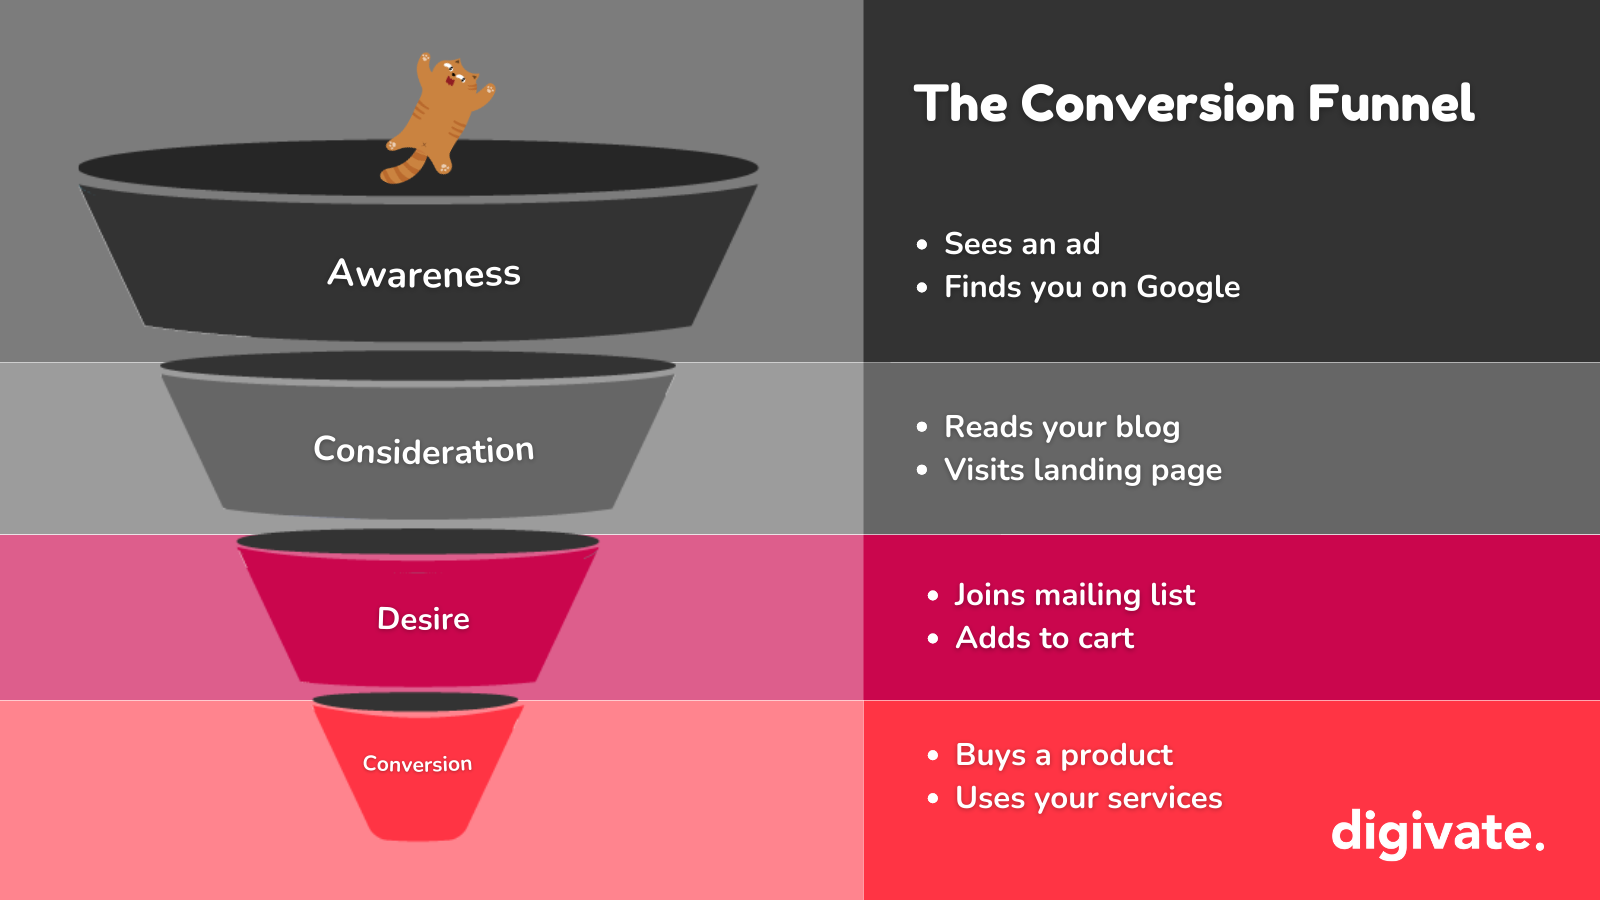 A conversion funnel illustration shows different stages leading from awareness to consideration to desire to conversion.